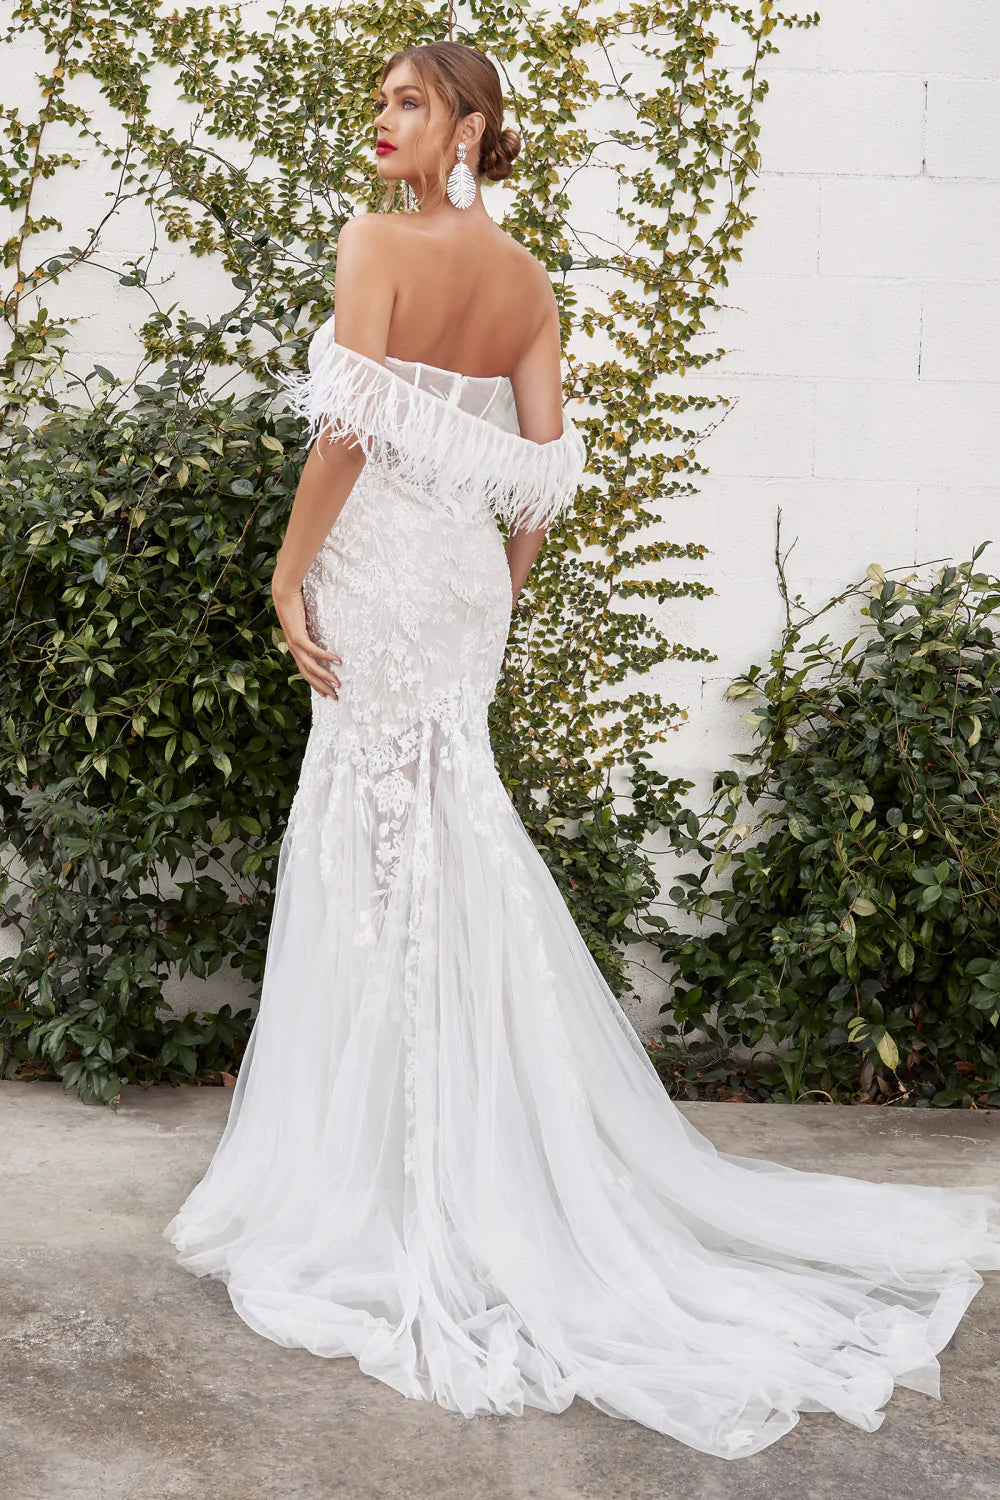 Sereia Sparkly Mermaid Detachable Off Shoulder Feather Wedding Dress: White - Bella and Bloom Boutique